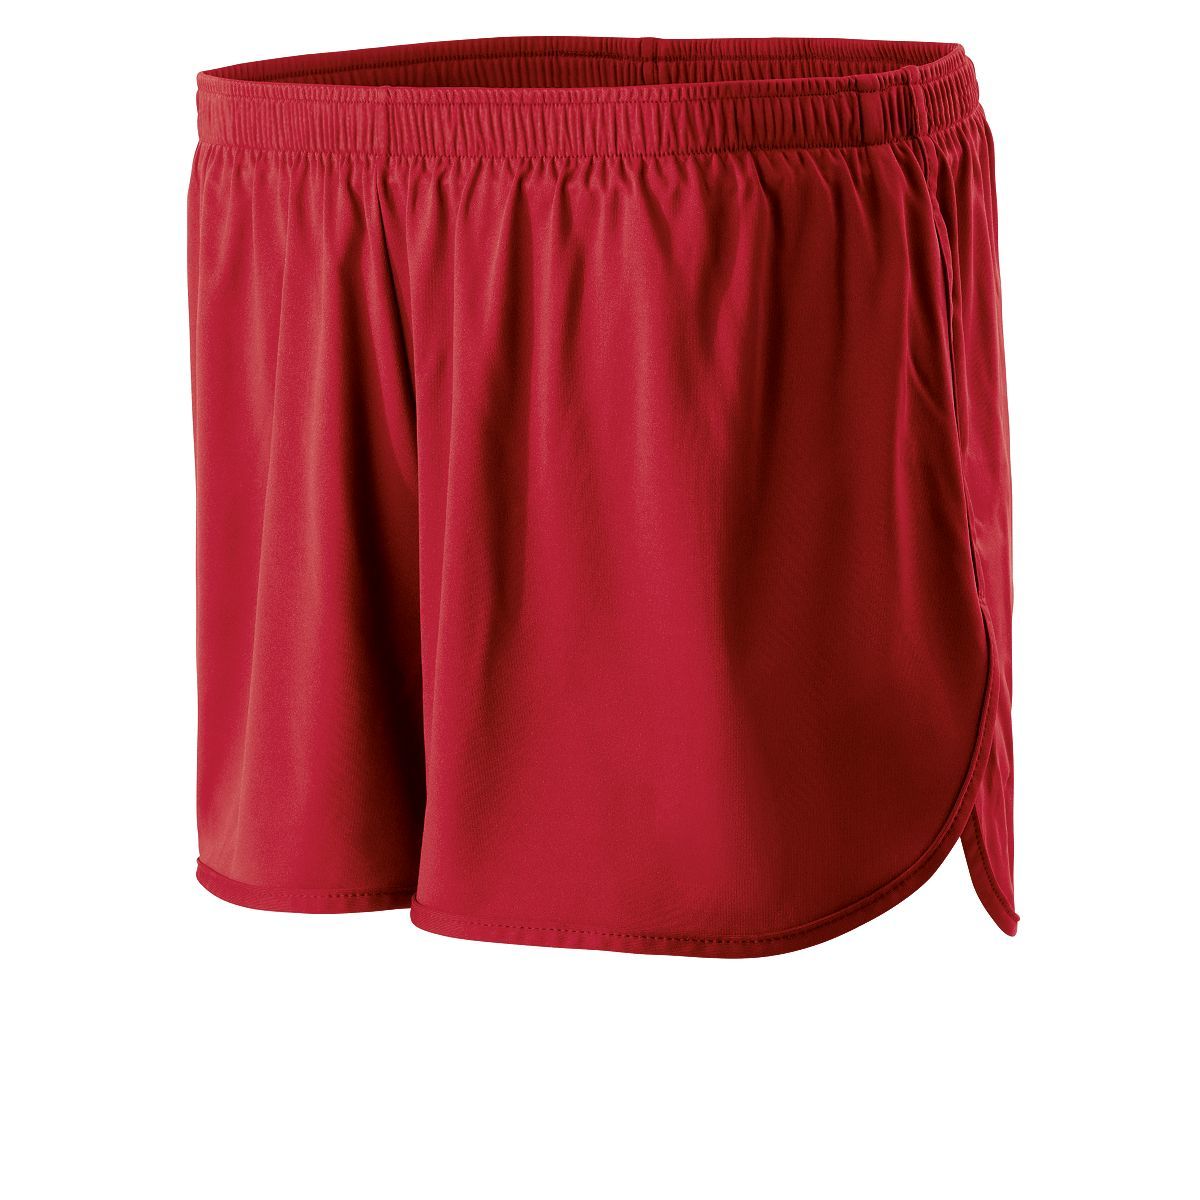 Holloway Anchor Shorts in Scarlet  -Part of the Adult, Adult-Shorts, Track-Field, Holloway product lines at KanaleyCreations.com